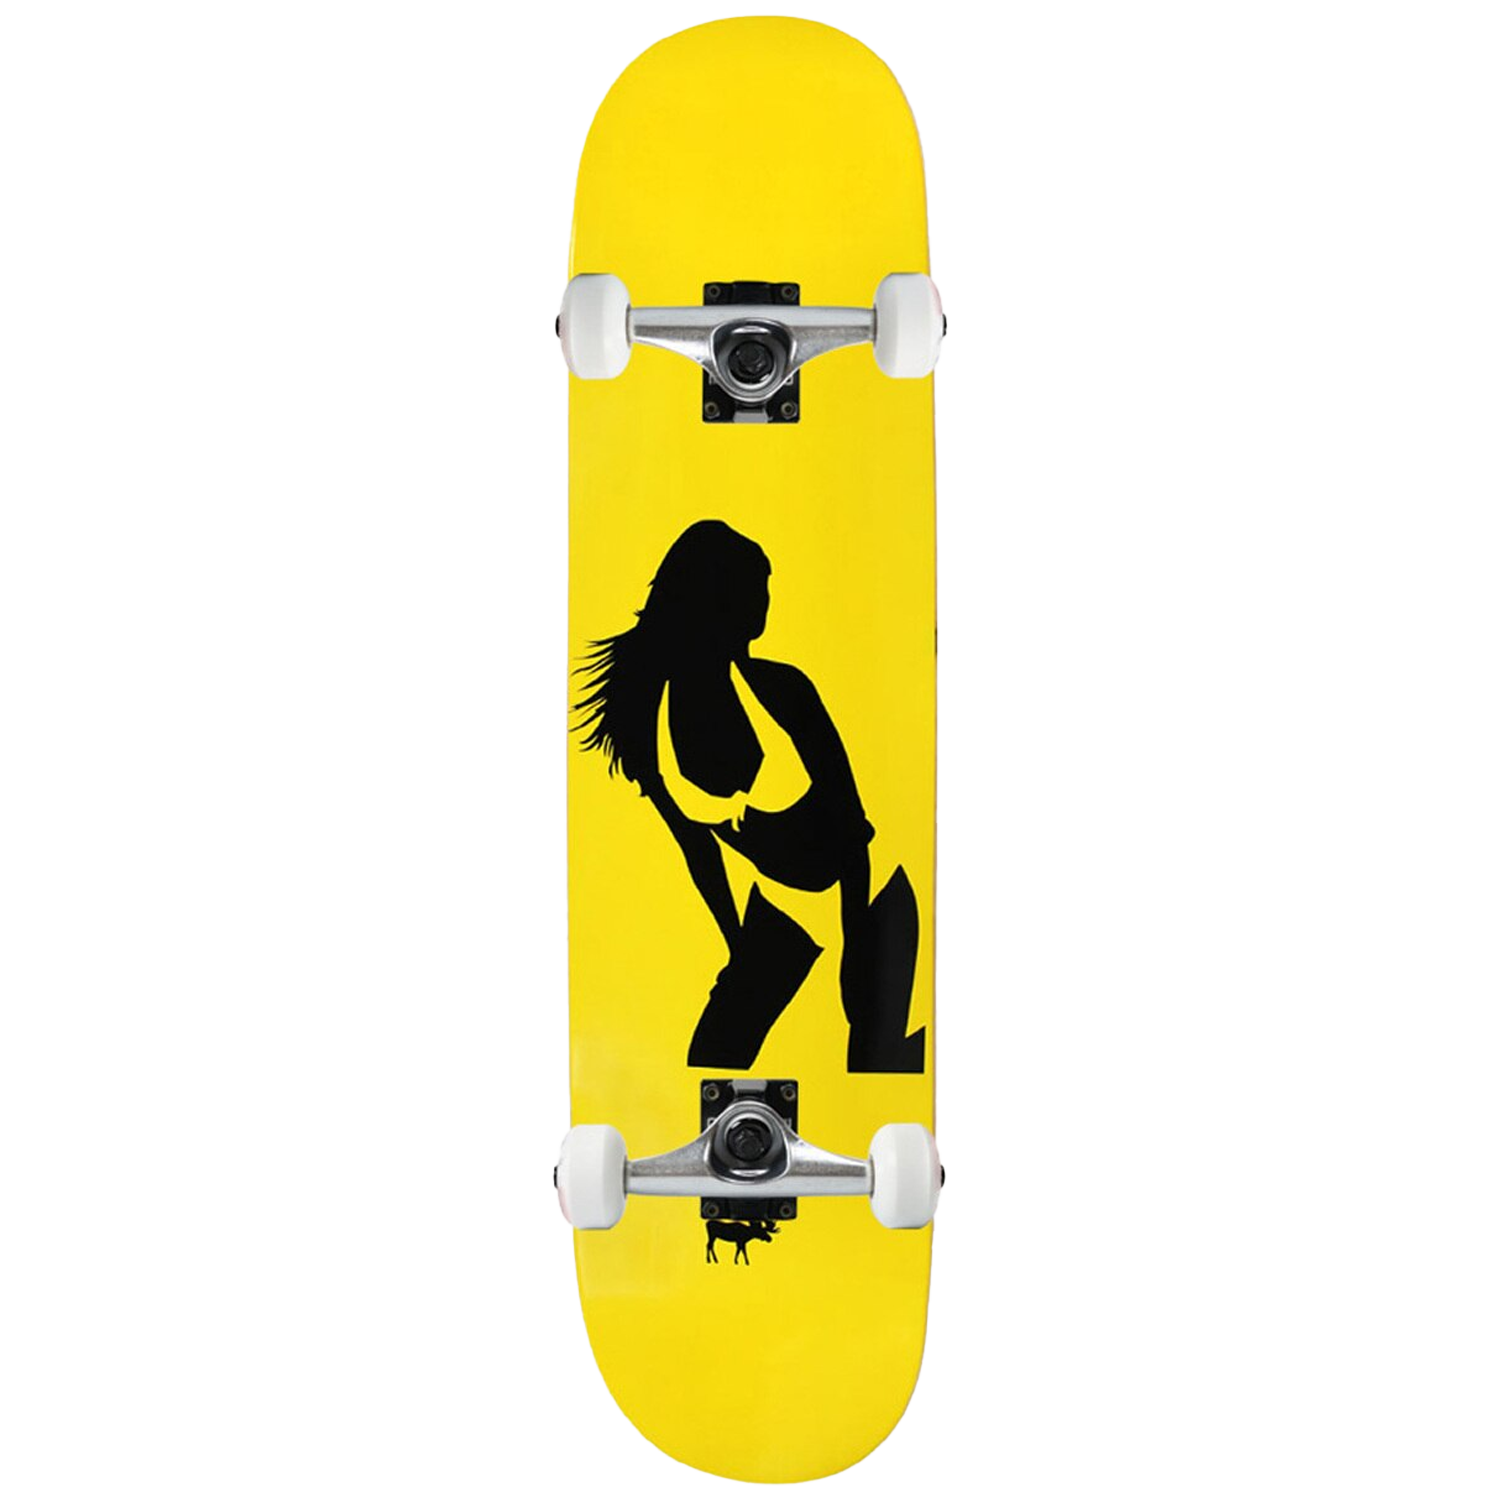 Moose Skateboard Complete Girl Silhouette Yellow 7.75in